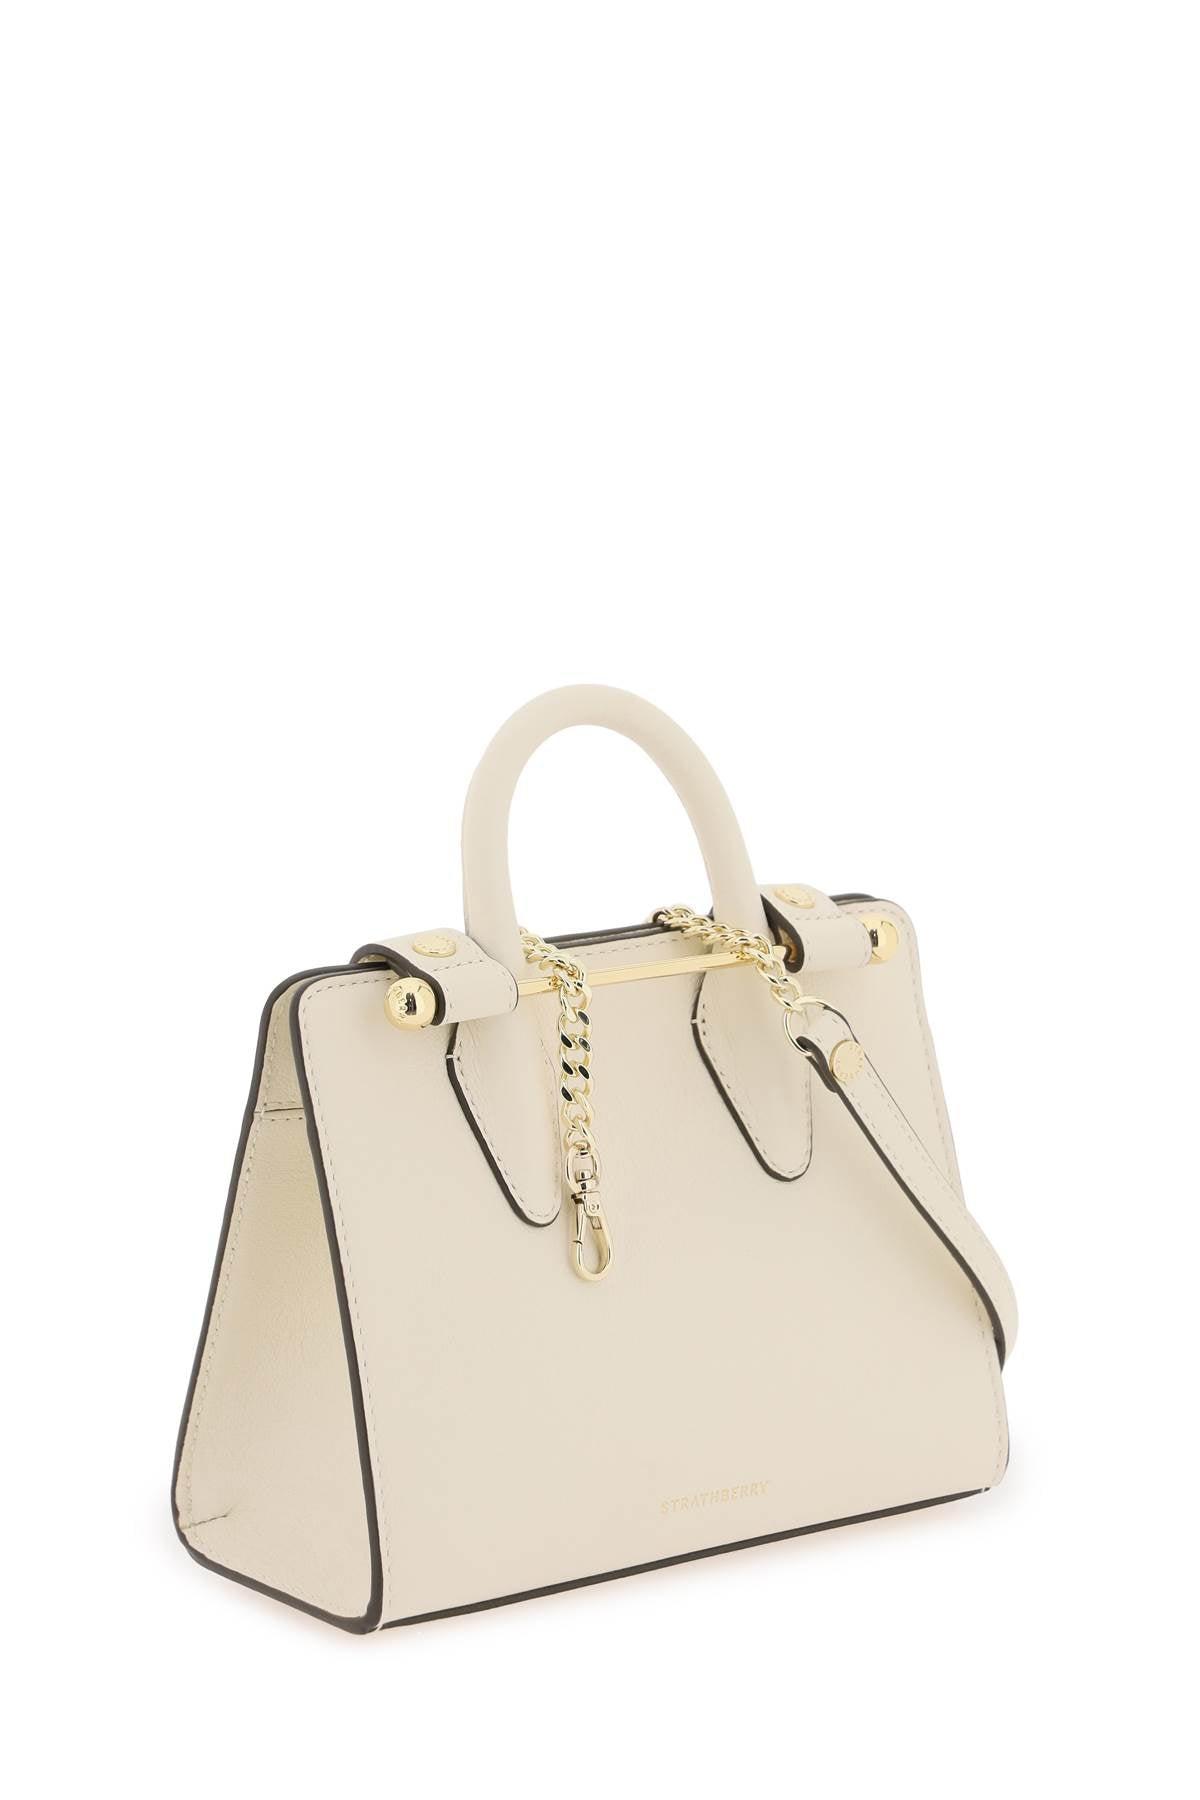 The Strathberry Midi Tote - Top Handle Leather Tote Bag - Natural